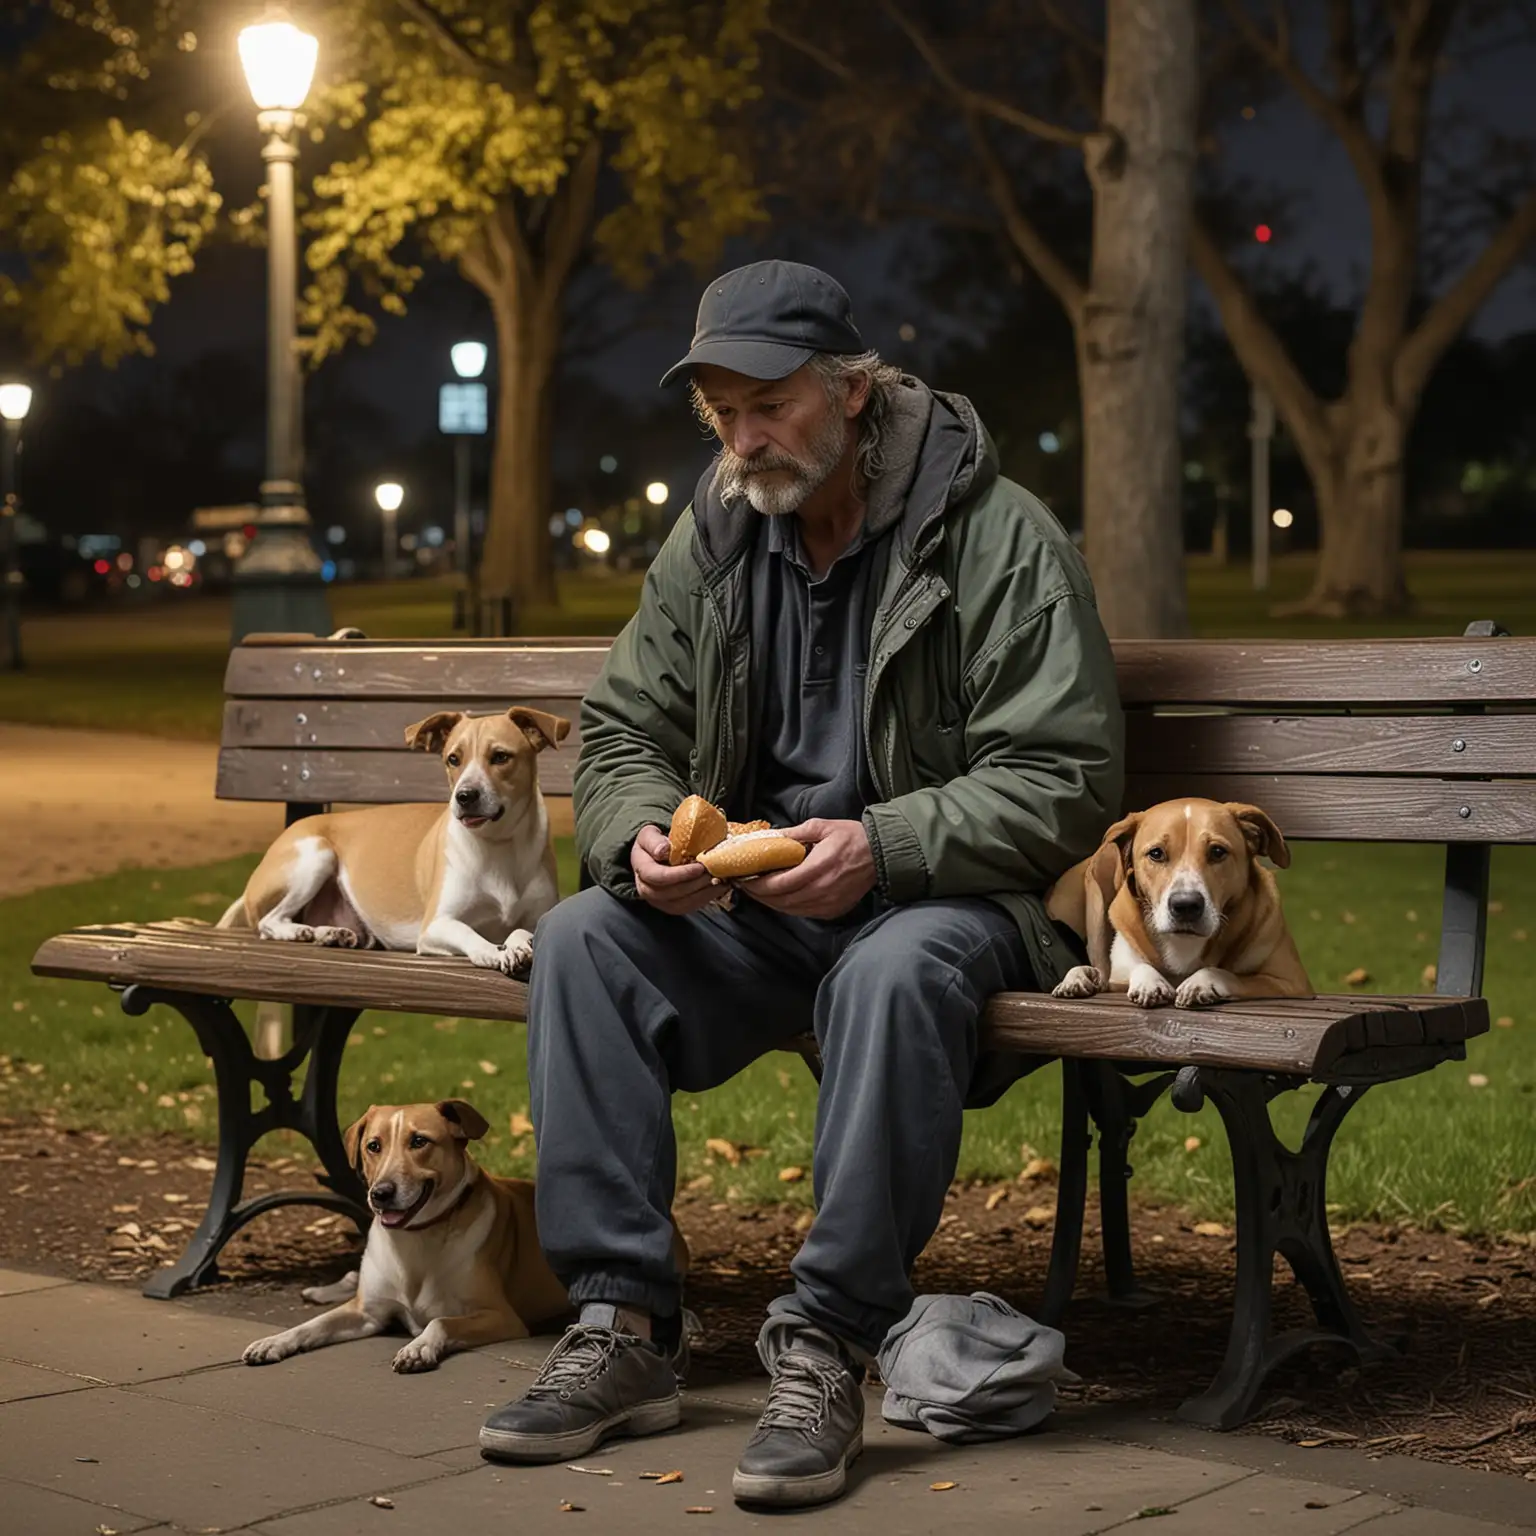 Homeless Gentleman Feeding Dogs at Night in the Park